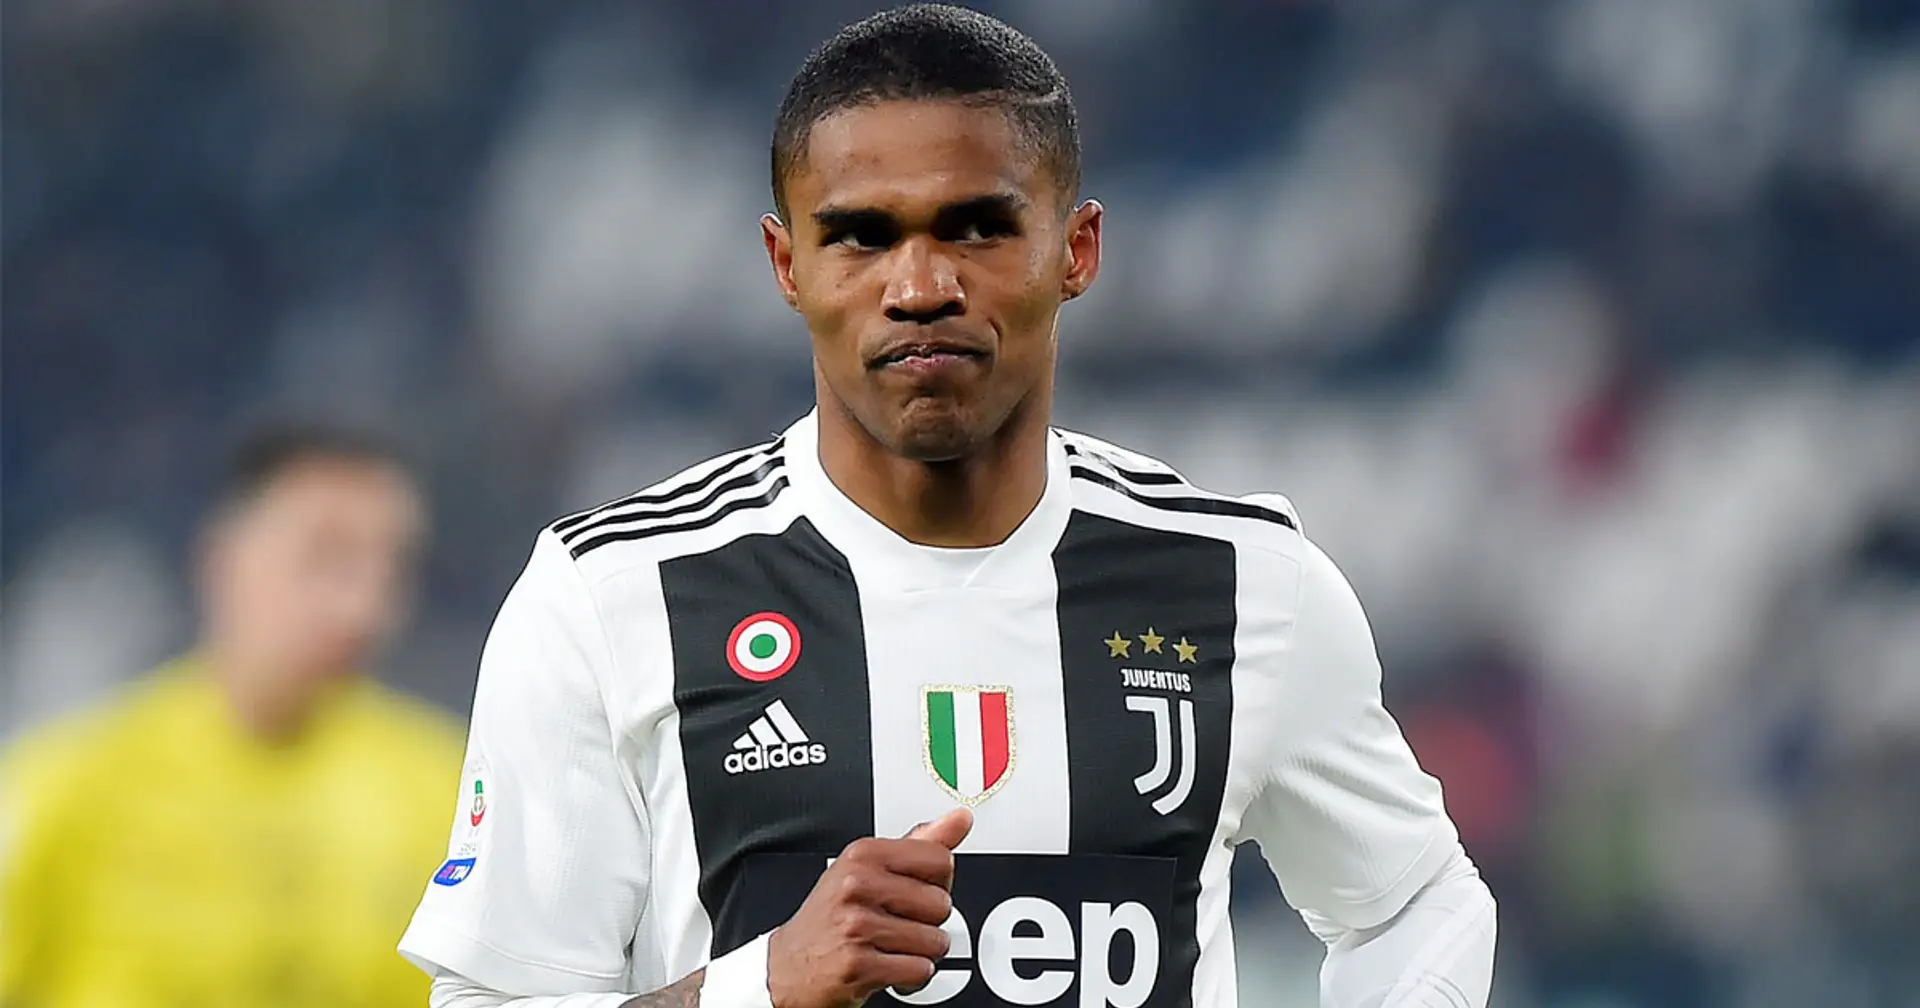 United reportedly make £27m bid for Douglas Costa as they eye potential Sancho alternative